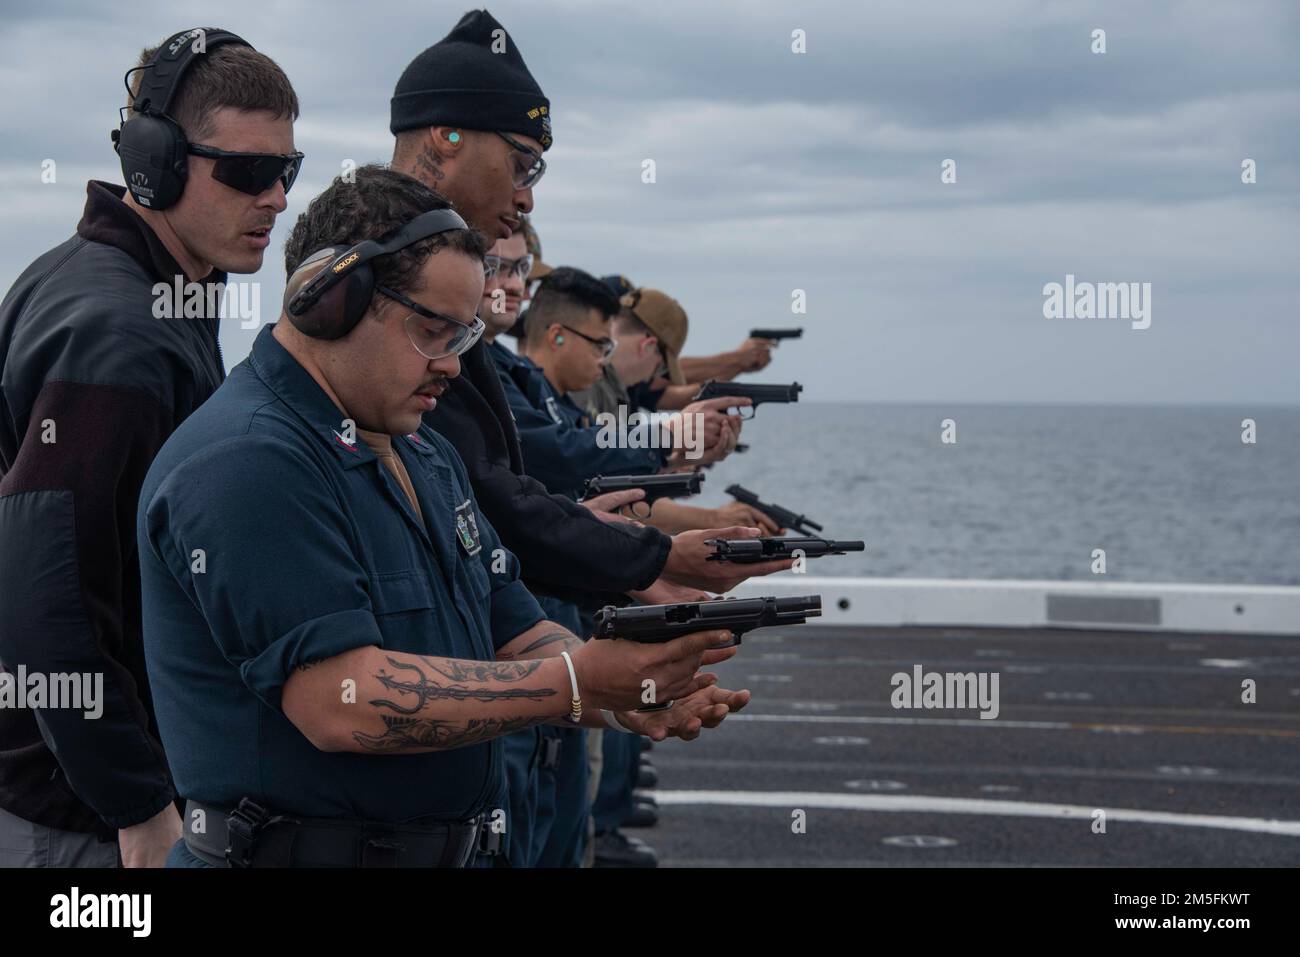 220313-N-XB010-1005 EAST CHINA SEA (March 13, 2022) Sailors assigned to USS New Orleans (LPD 18) fire and reload 9mm handguns during a gun shoot on the flight deck. New Orleans, part of the America Amphibious Ready Group, along with the 31st Marine Expeditionary Unit, is operating in the U.S. 7th Fleet area of responsibility to enhance interoperability with allies and partners and serve as a ready response force to defend peace and stability in the Indo-Pacific region. Stock Photo